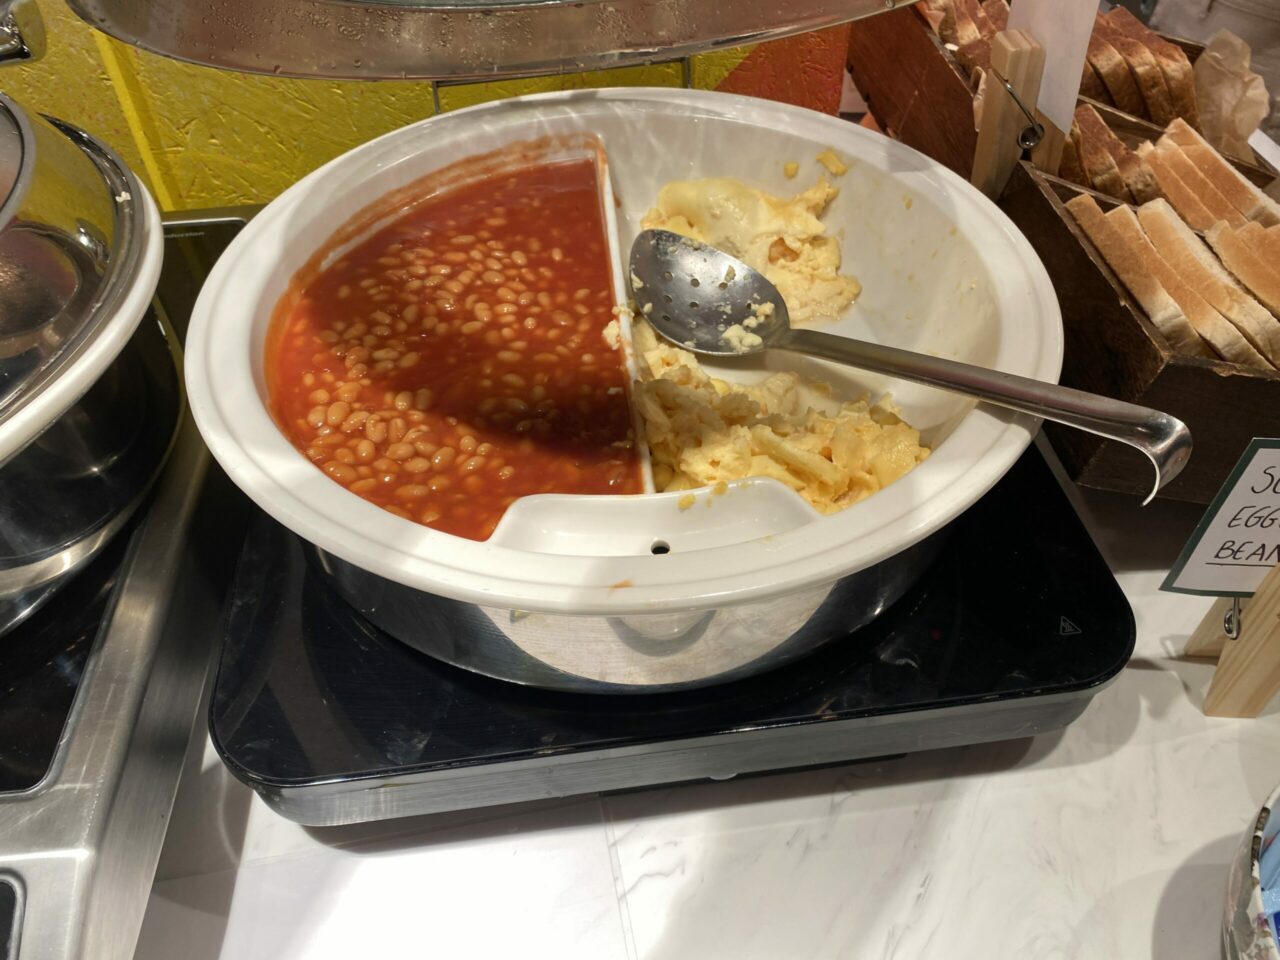 baked beans at nHow London hotel